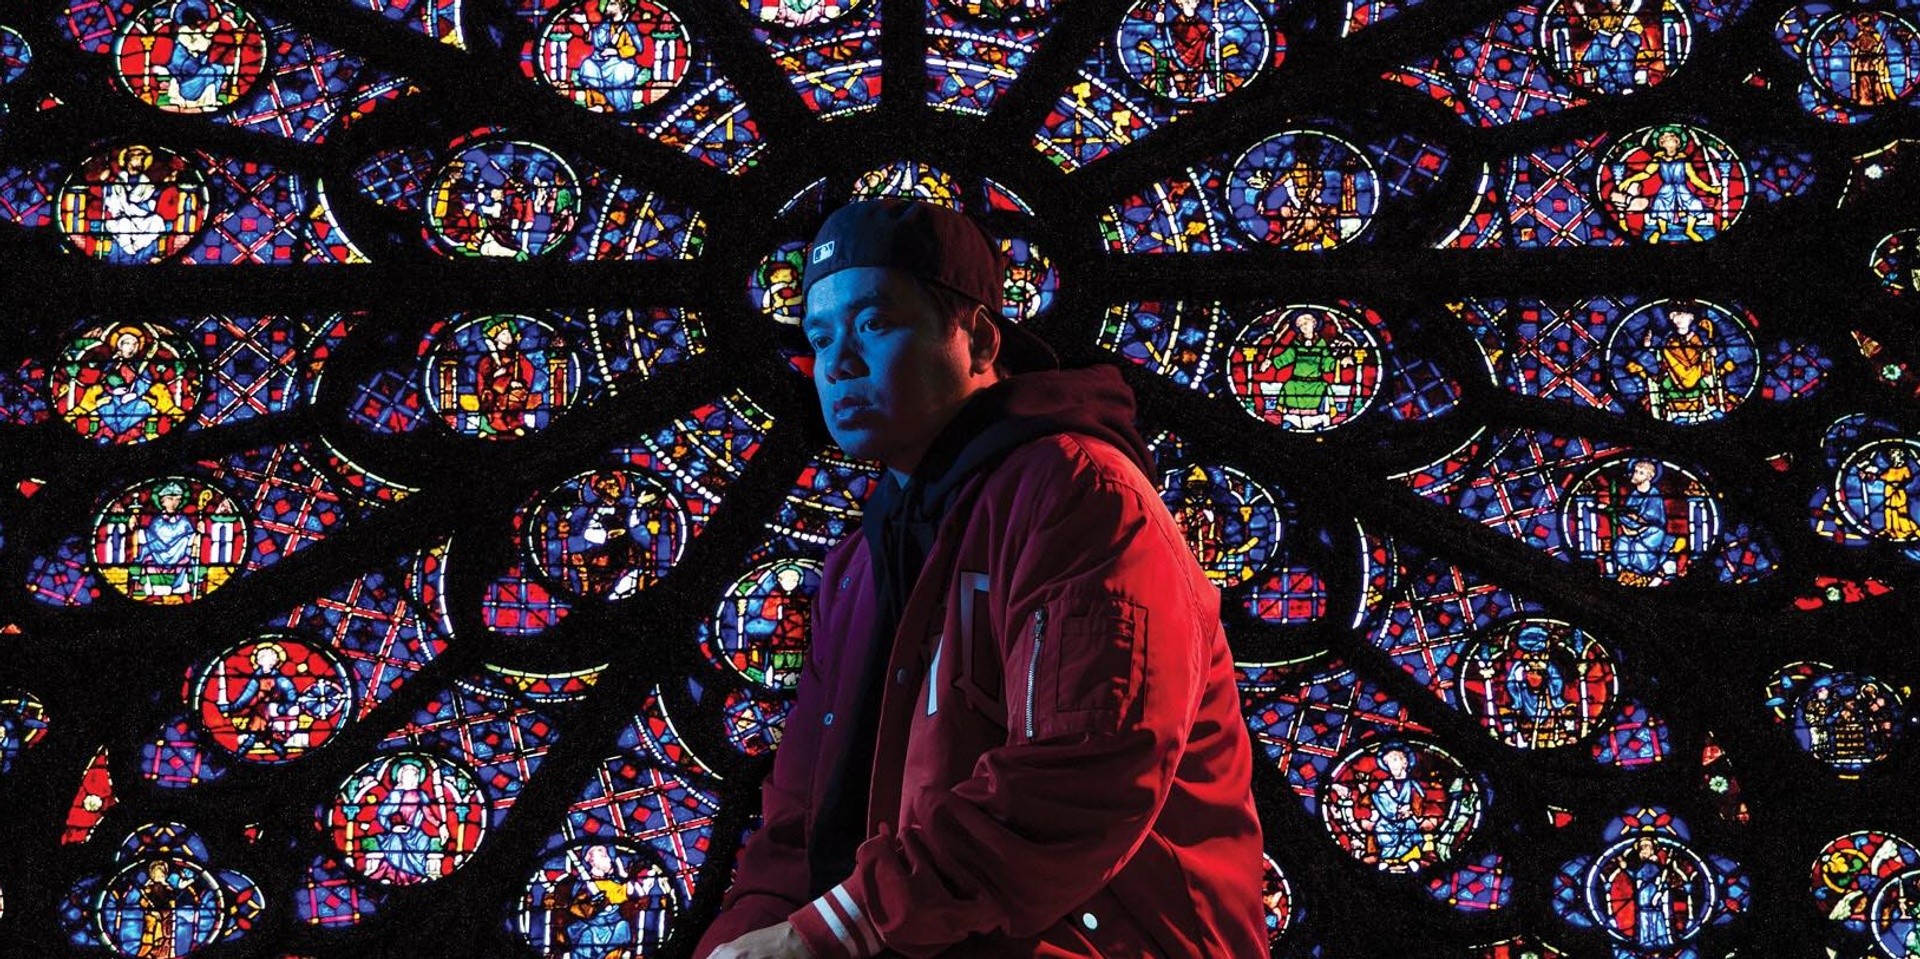 Gloc-9 releases TULAy EP featuring collabs with Julie Anne San Jose, Al James,  Smugglaz, and more – listen